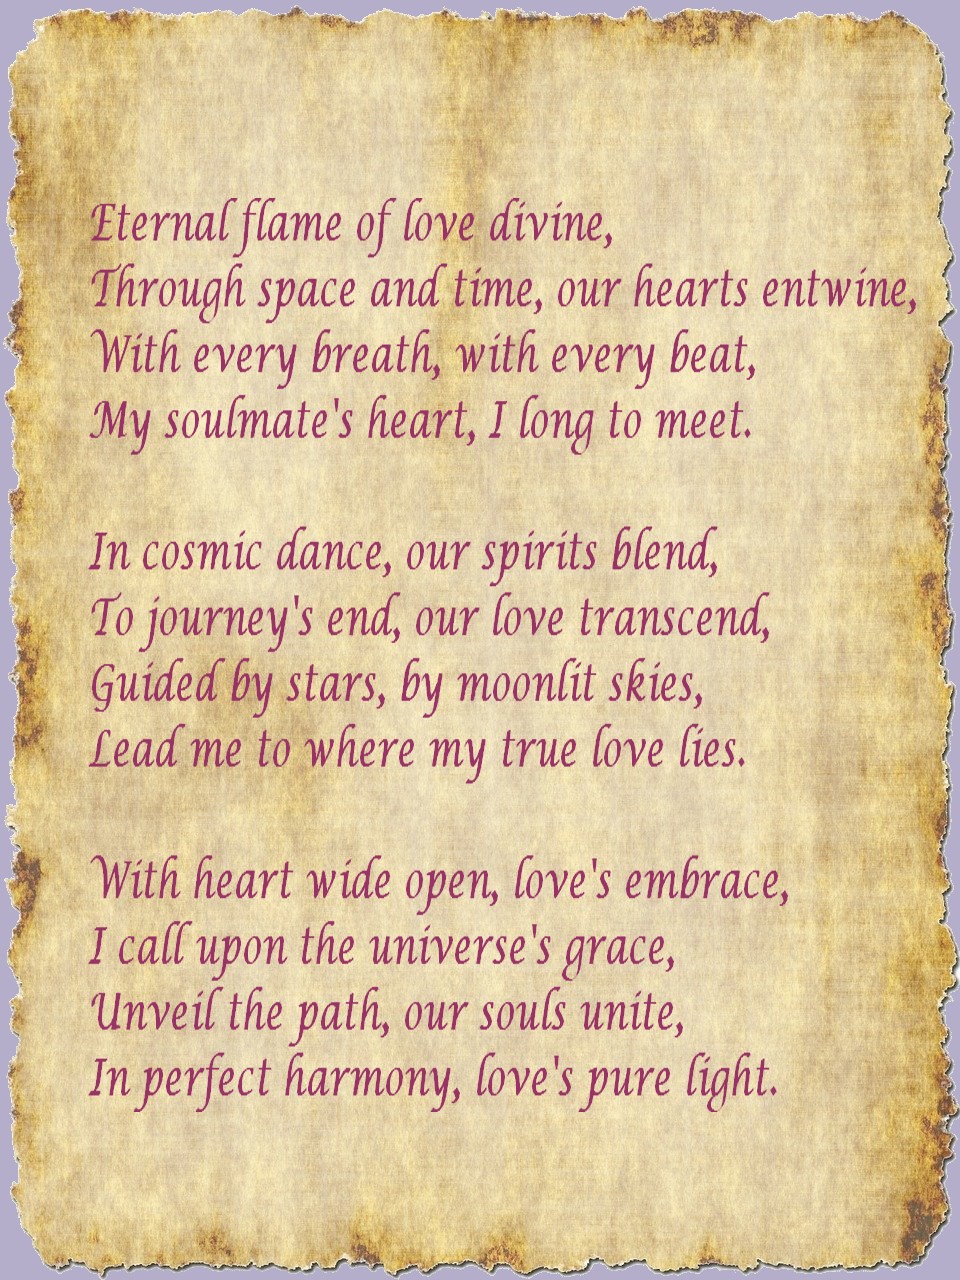 Image of Soul Mate Chant on parchment